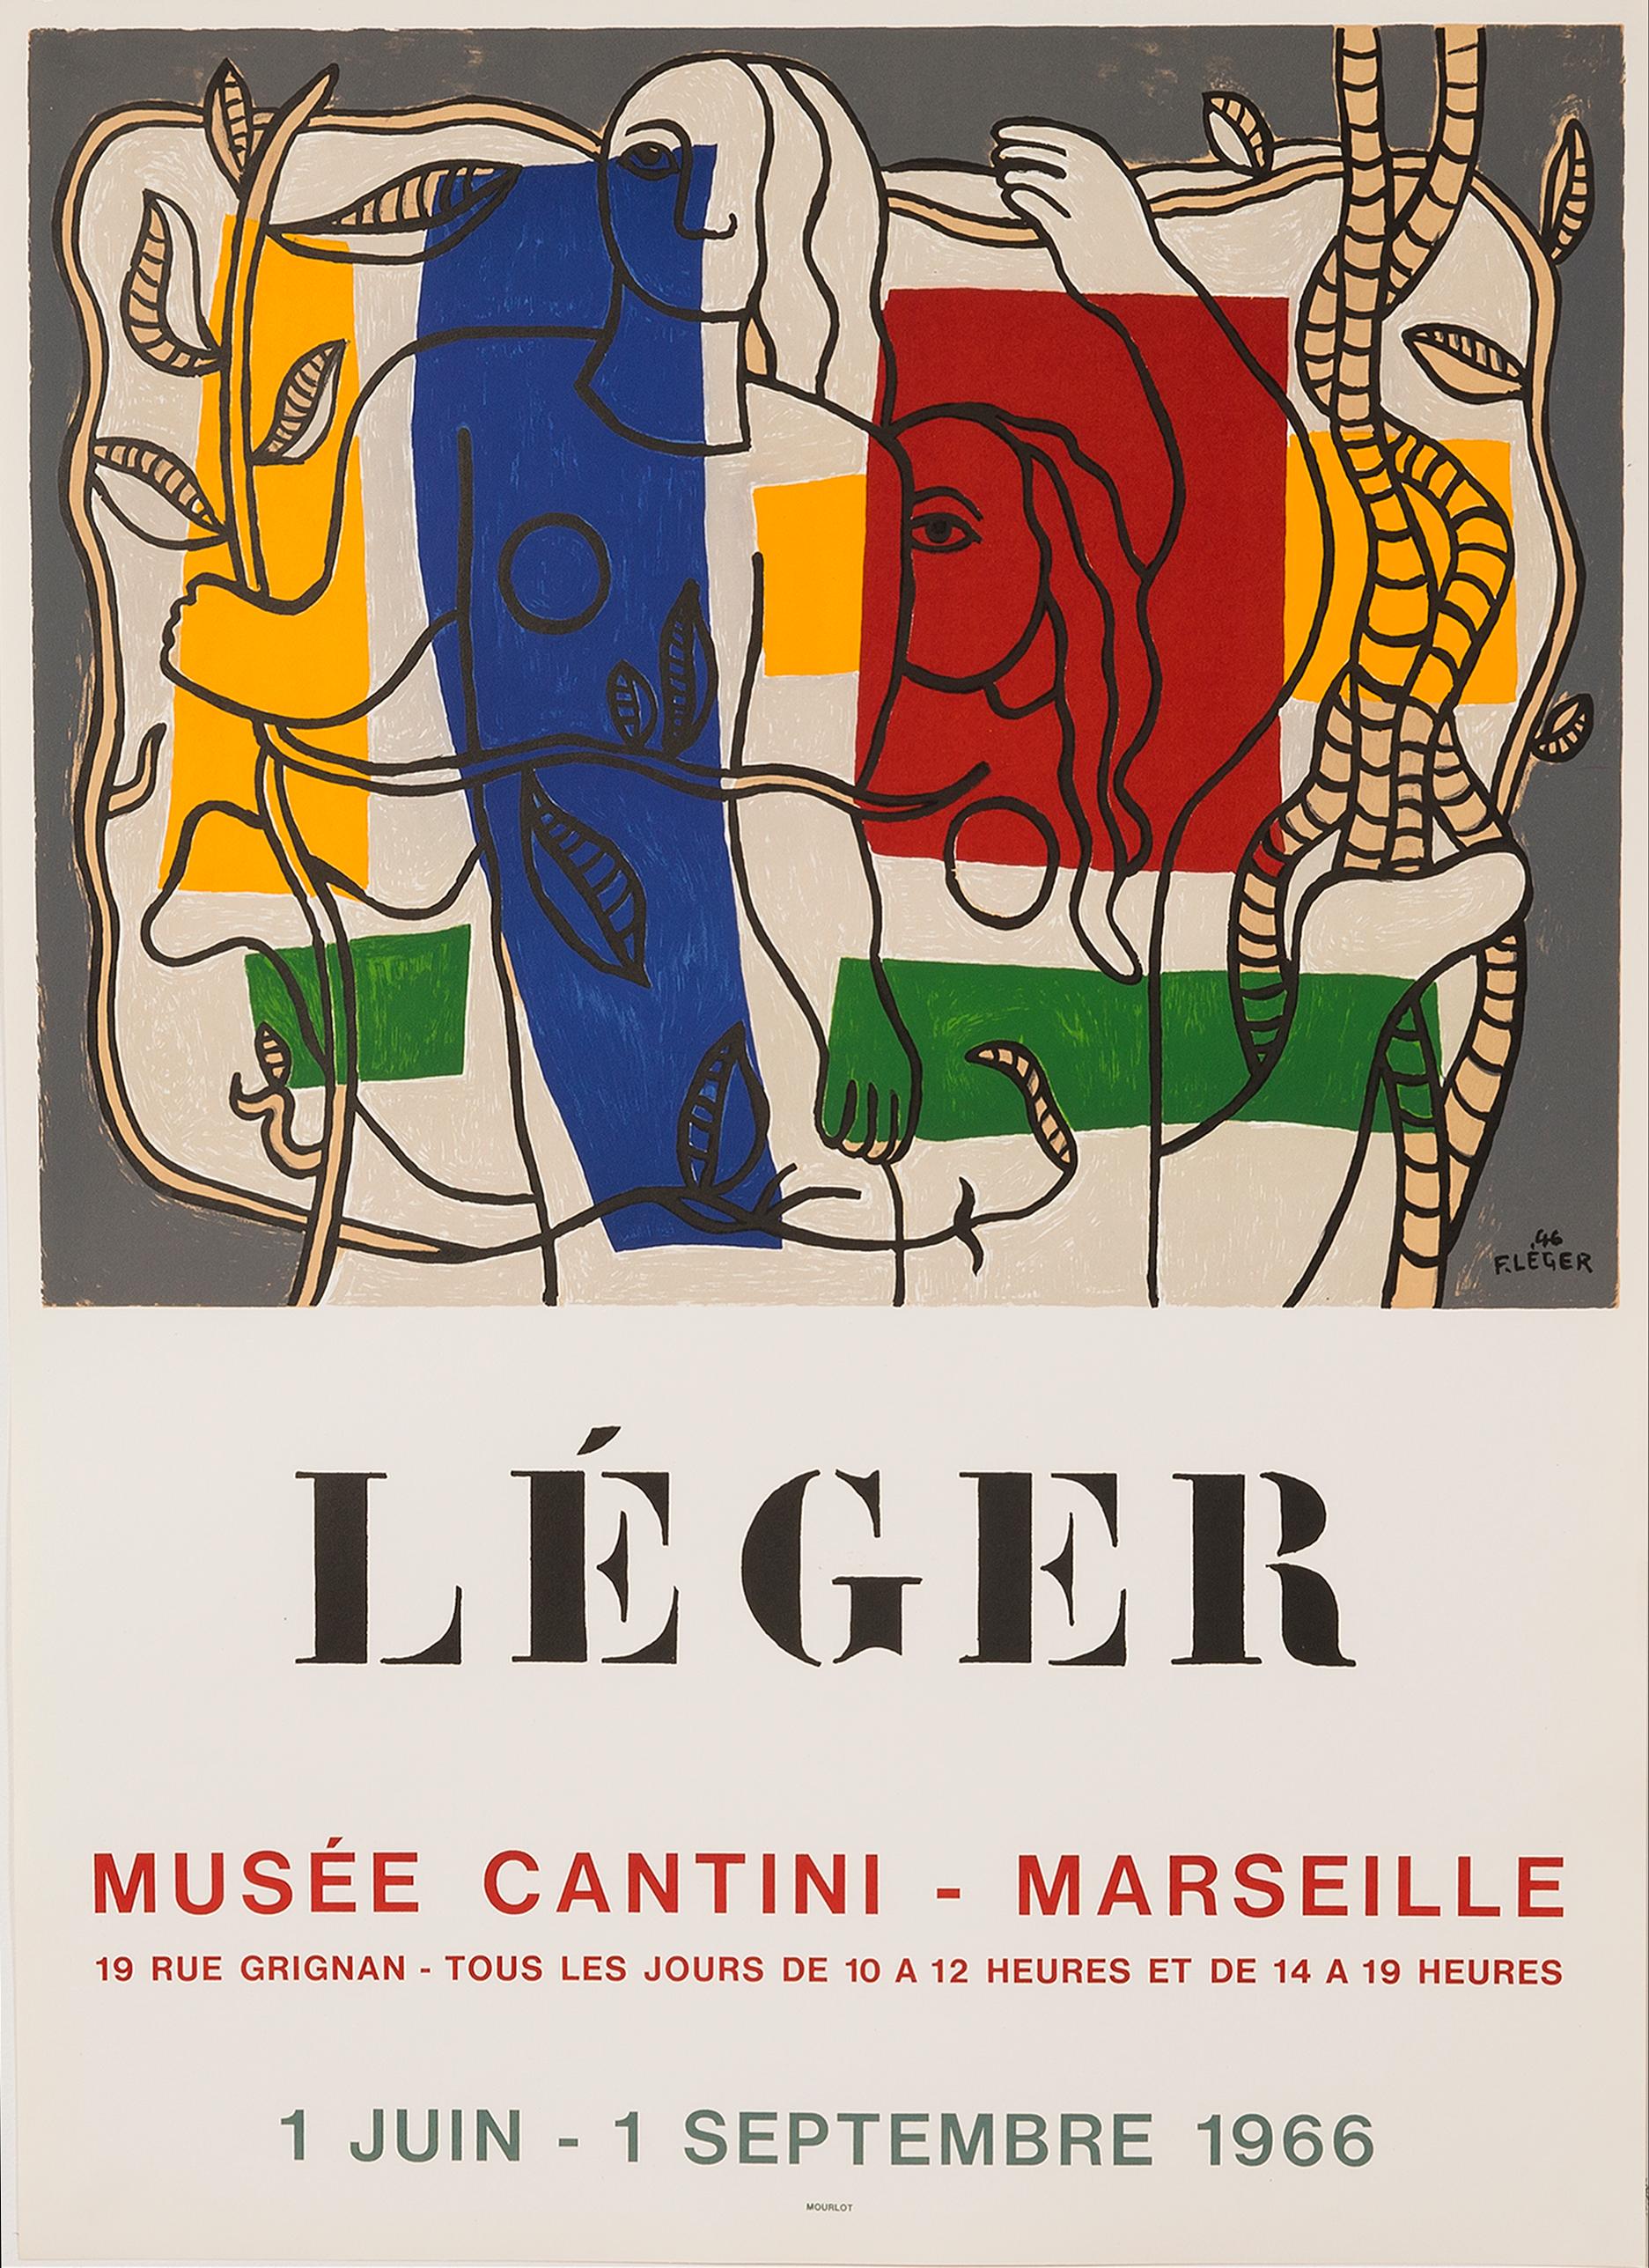 Musée Cantini lithographic poster by Fernand Leger, 1966